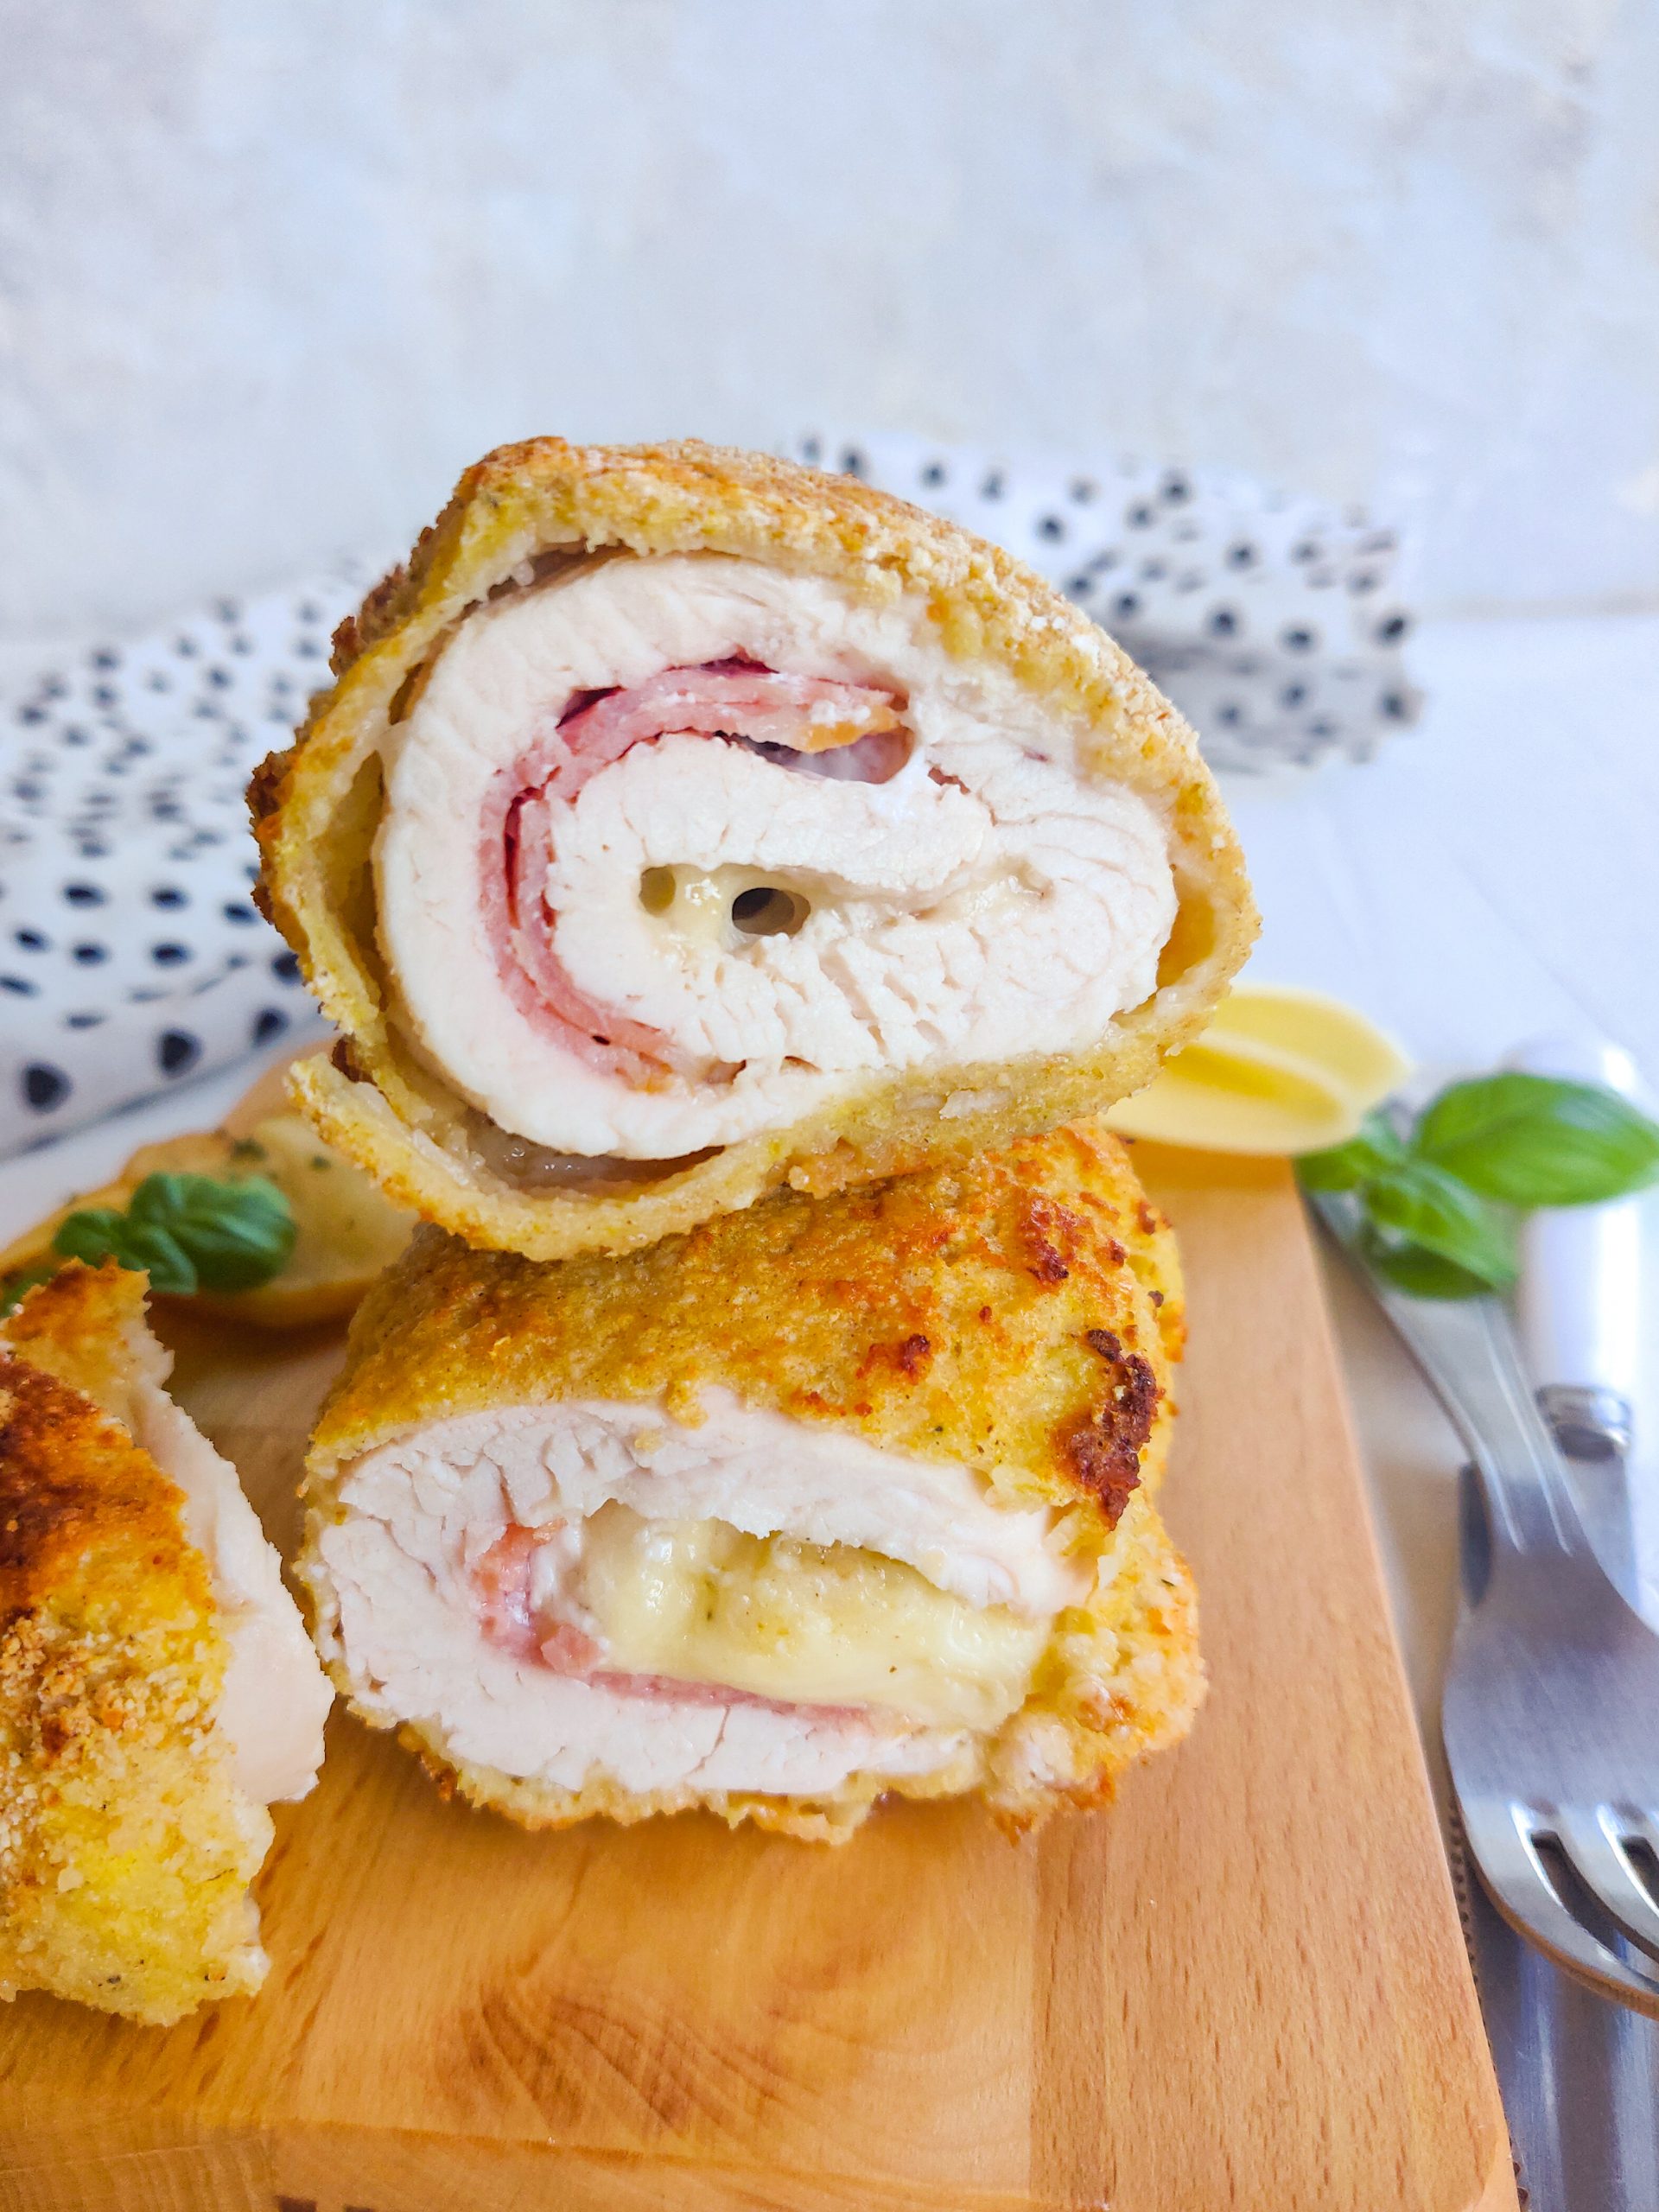 You are currently viewing Cordon bleu